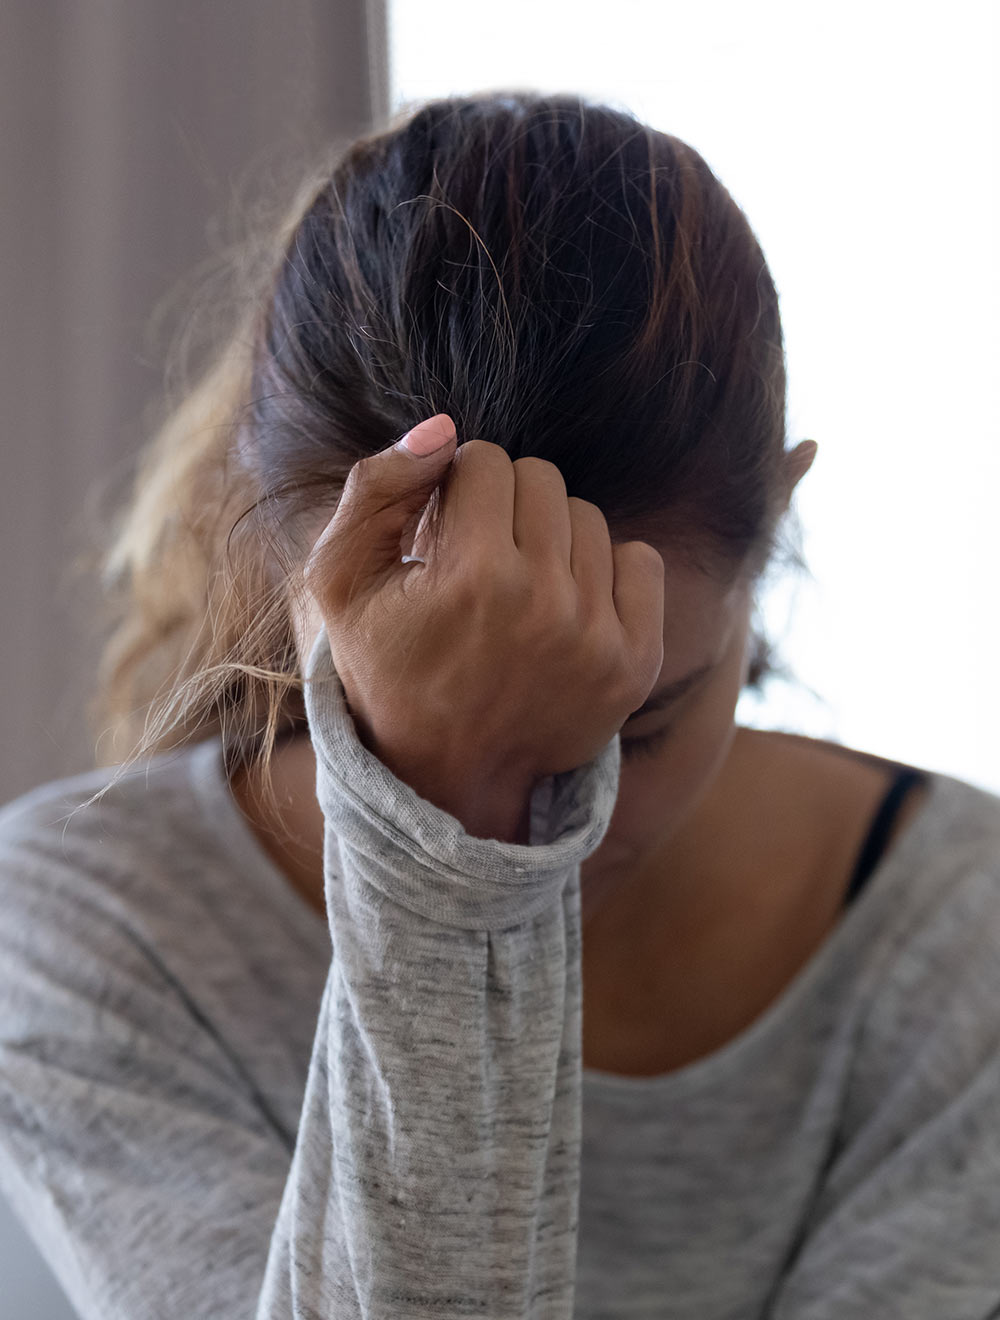 Image of a distressed woman resting her forehead on her hand. Learn how EMDR therapy in Birmingham, AL can help you cope with your past trauma.